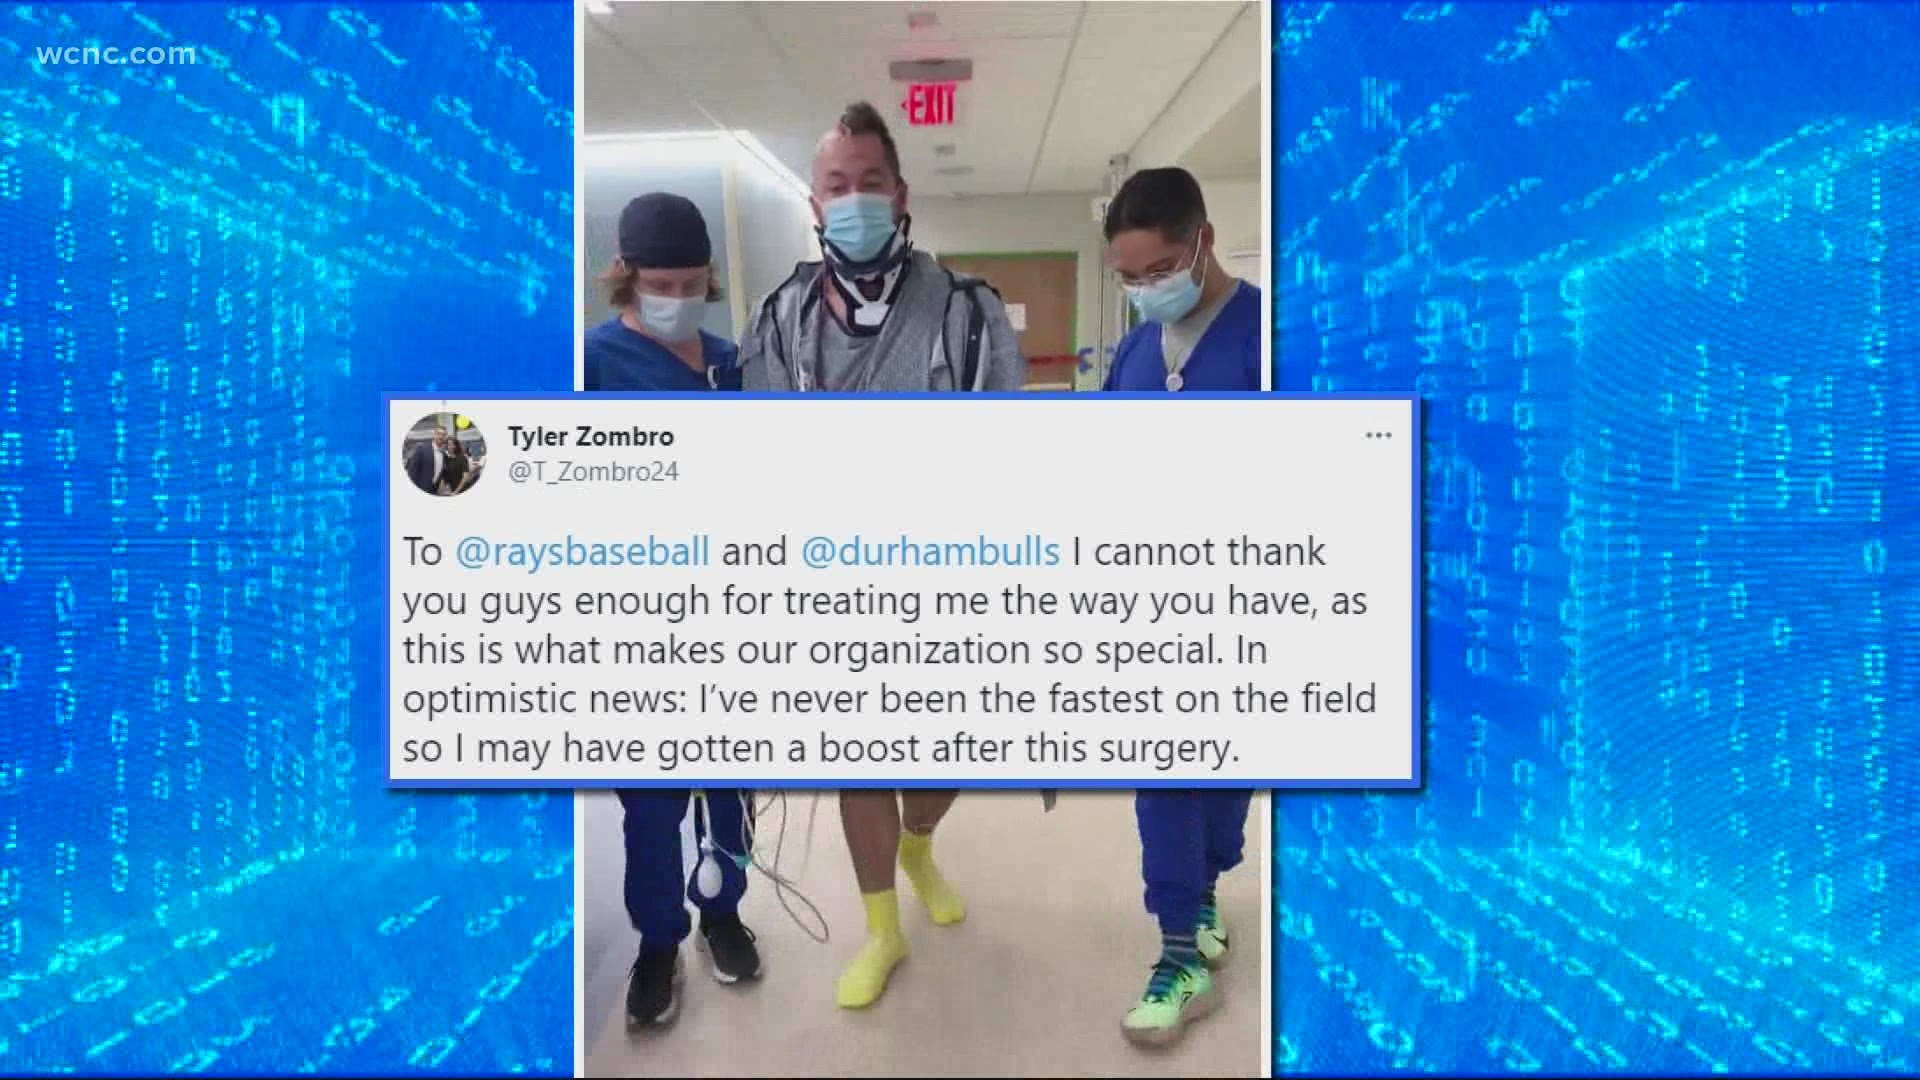 Tyler Zombro was hospitalized after getting hit in the head by a batted ball during a game two weeks ago.